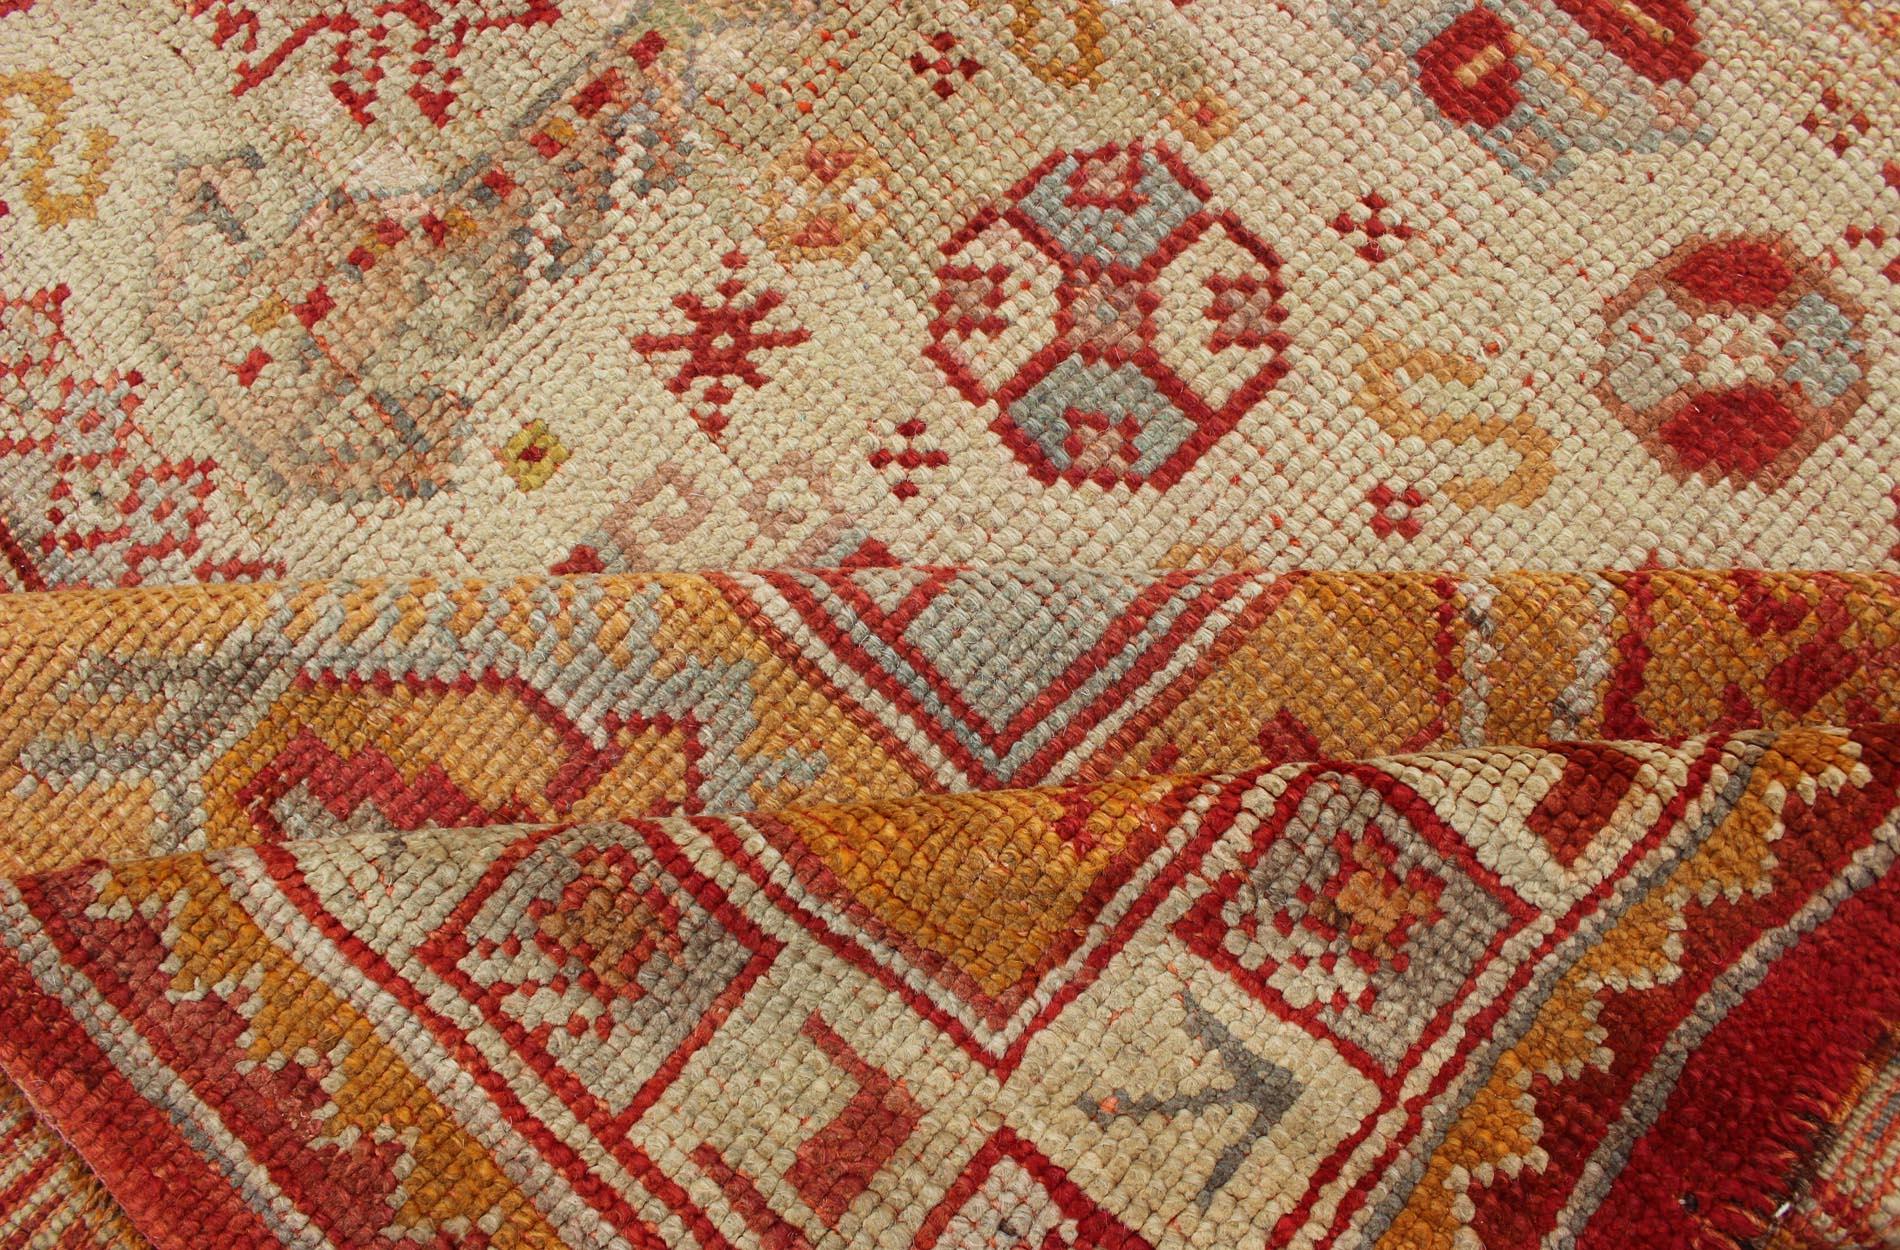 Antique Turkish Oushak Carpet With All-Over Design In Red, Taupe, and Orange For Sale 5